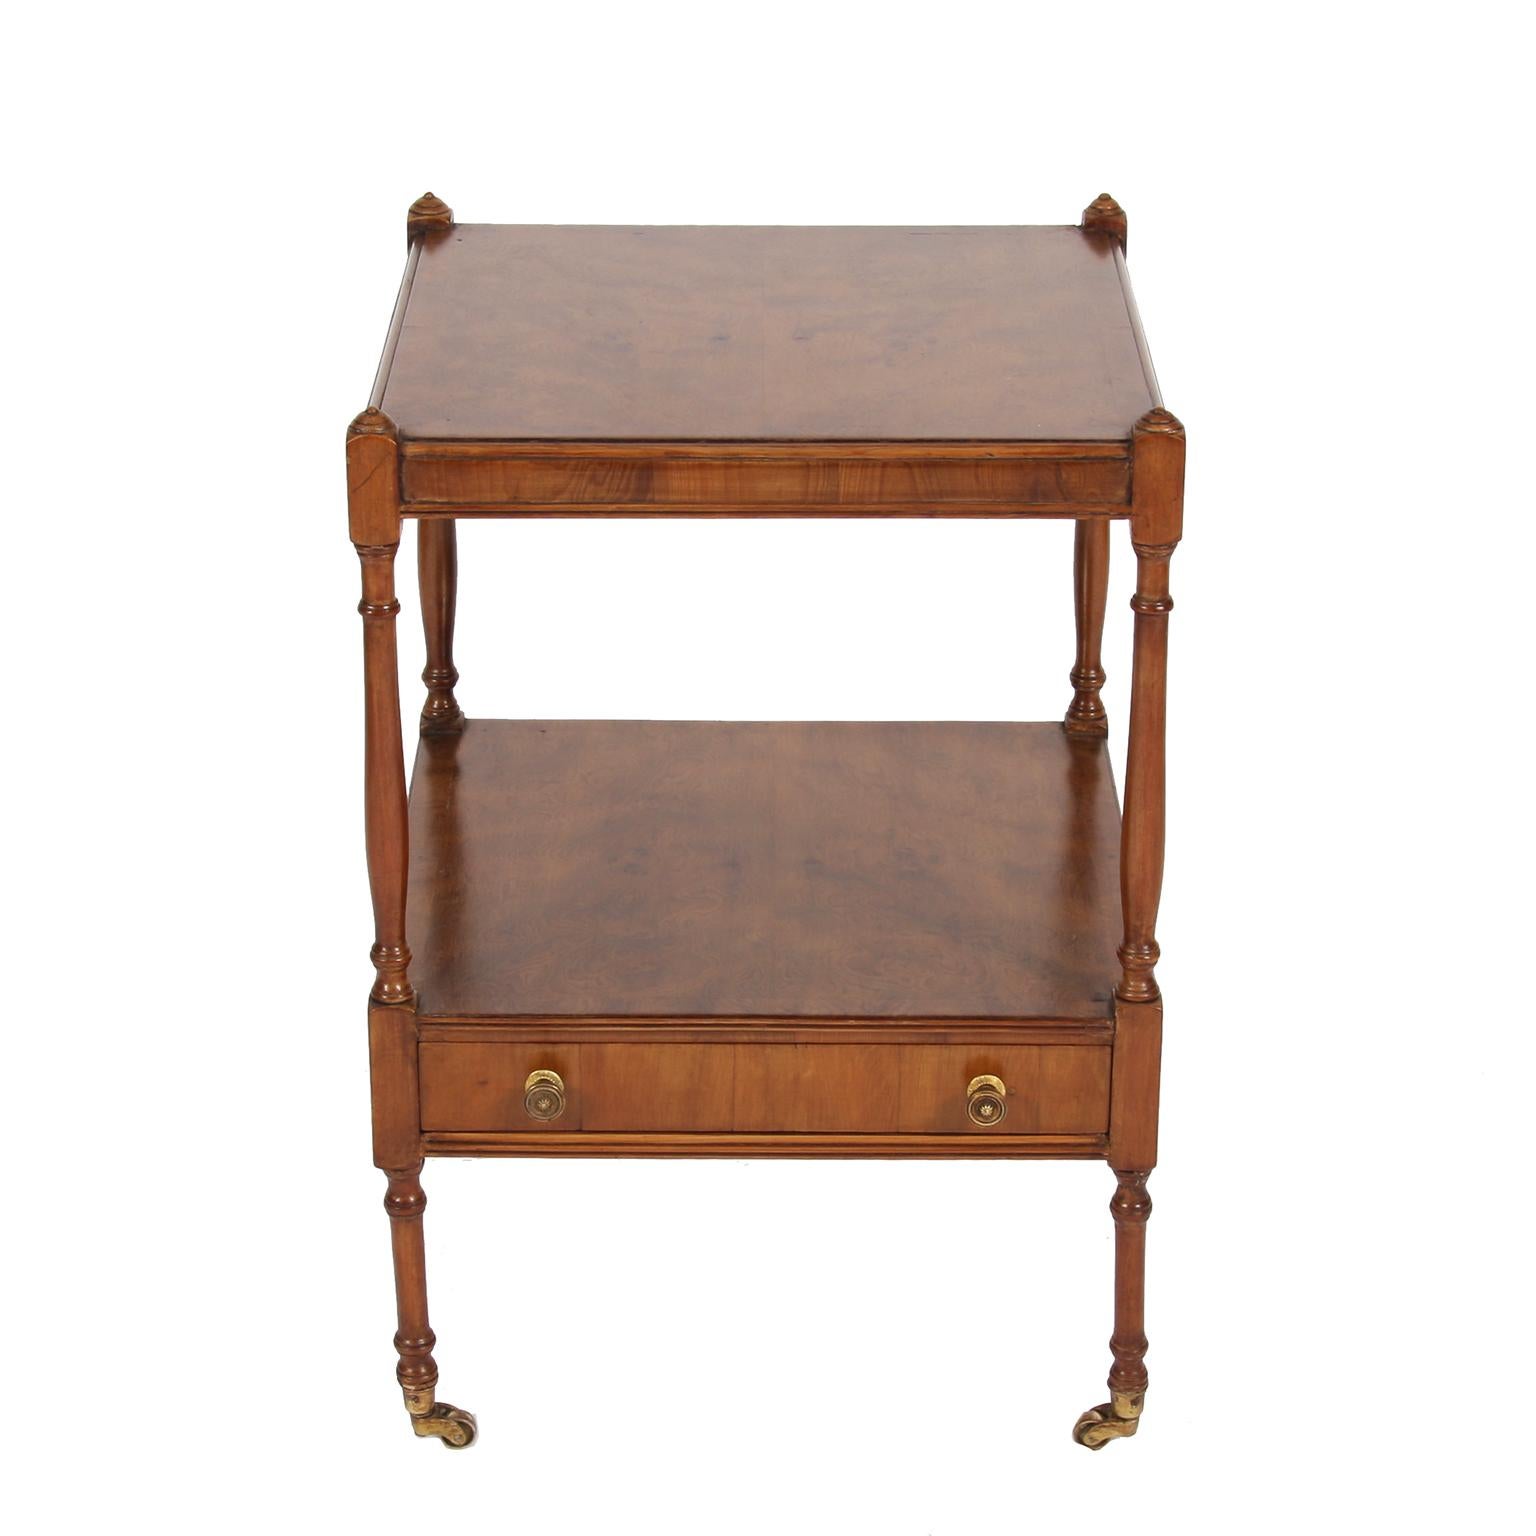 English Pair of Elm Bedside Tables